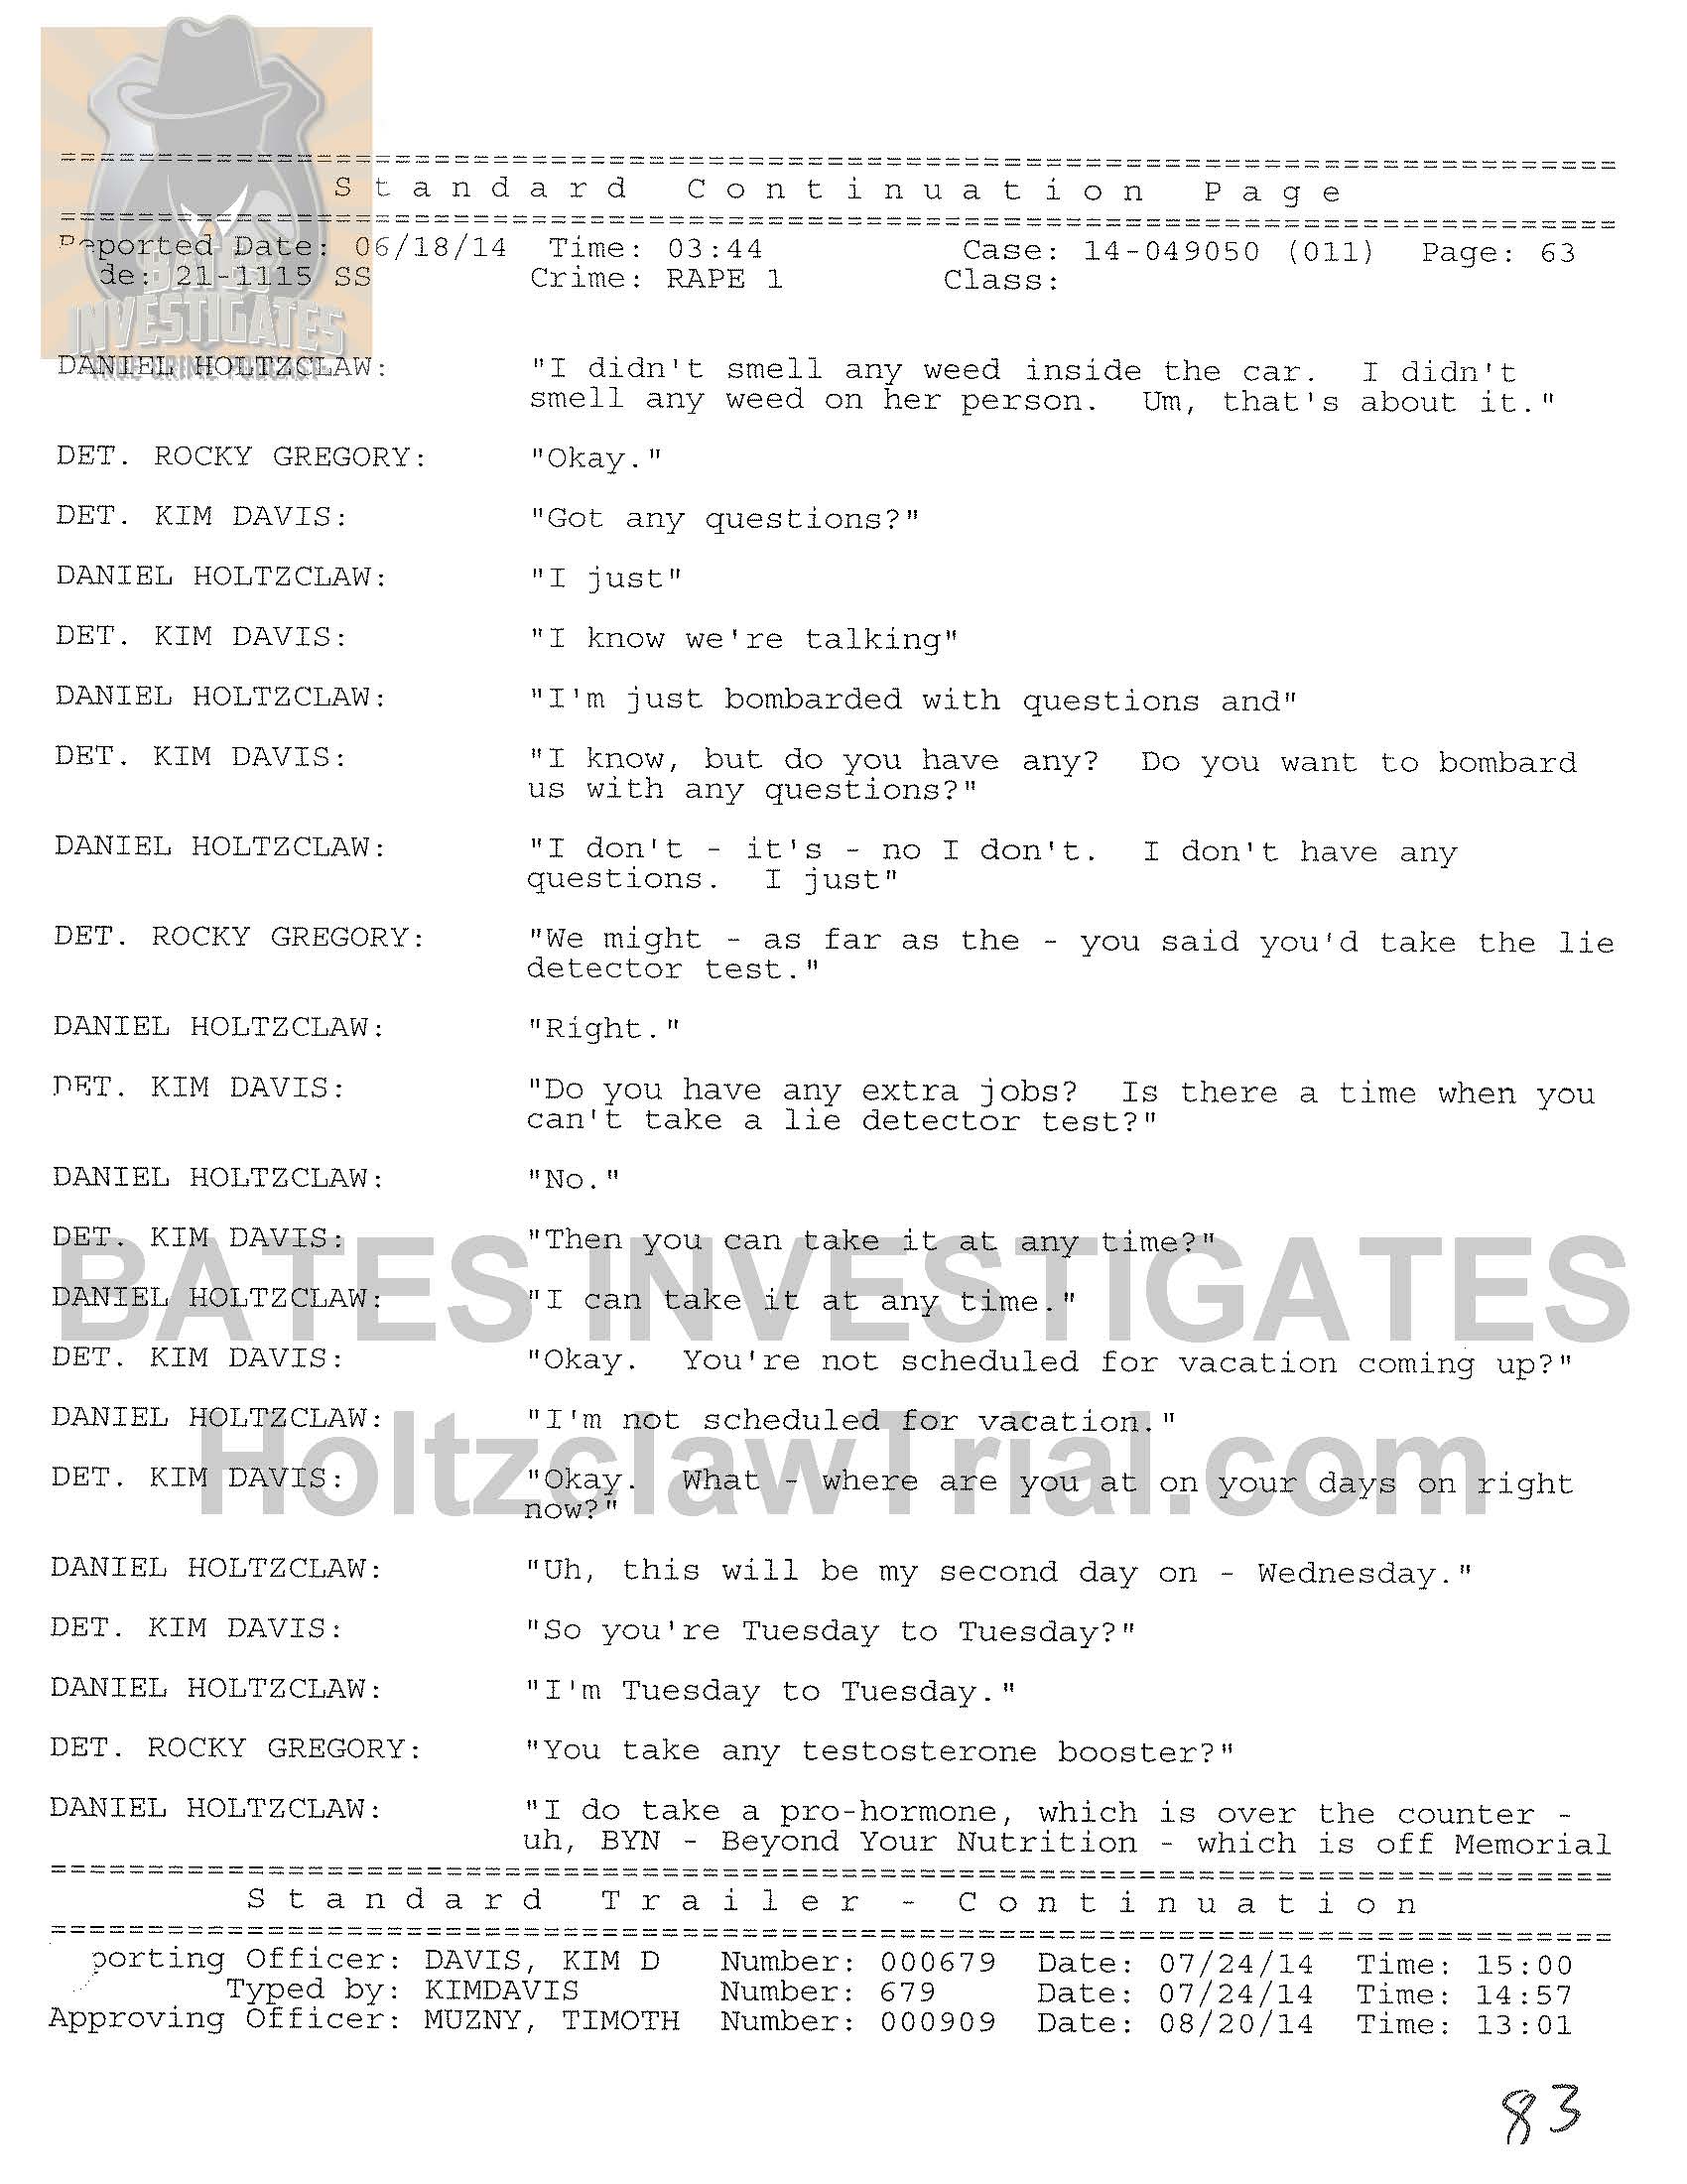 Holtzclaw Interrogation Transcript - Ep02 Redacted_Page_63.jpg